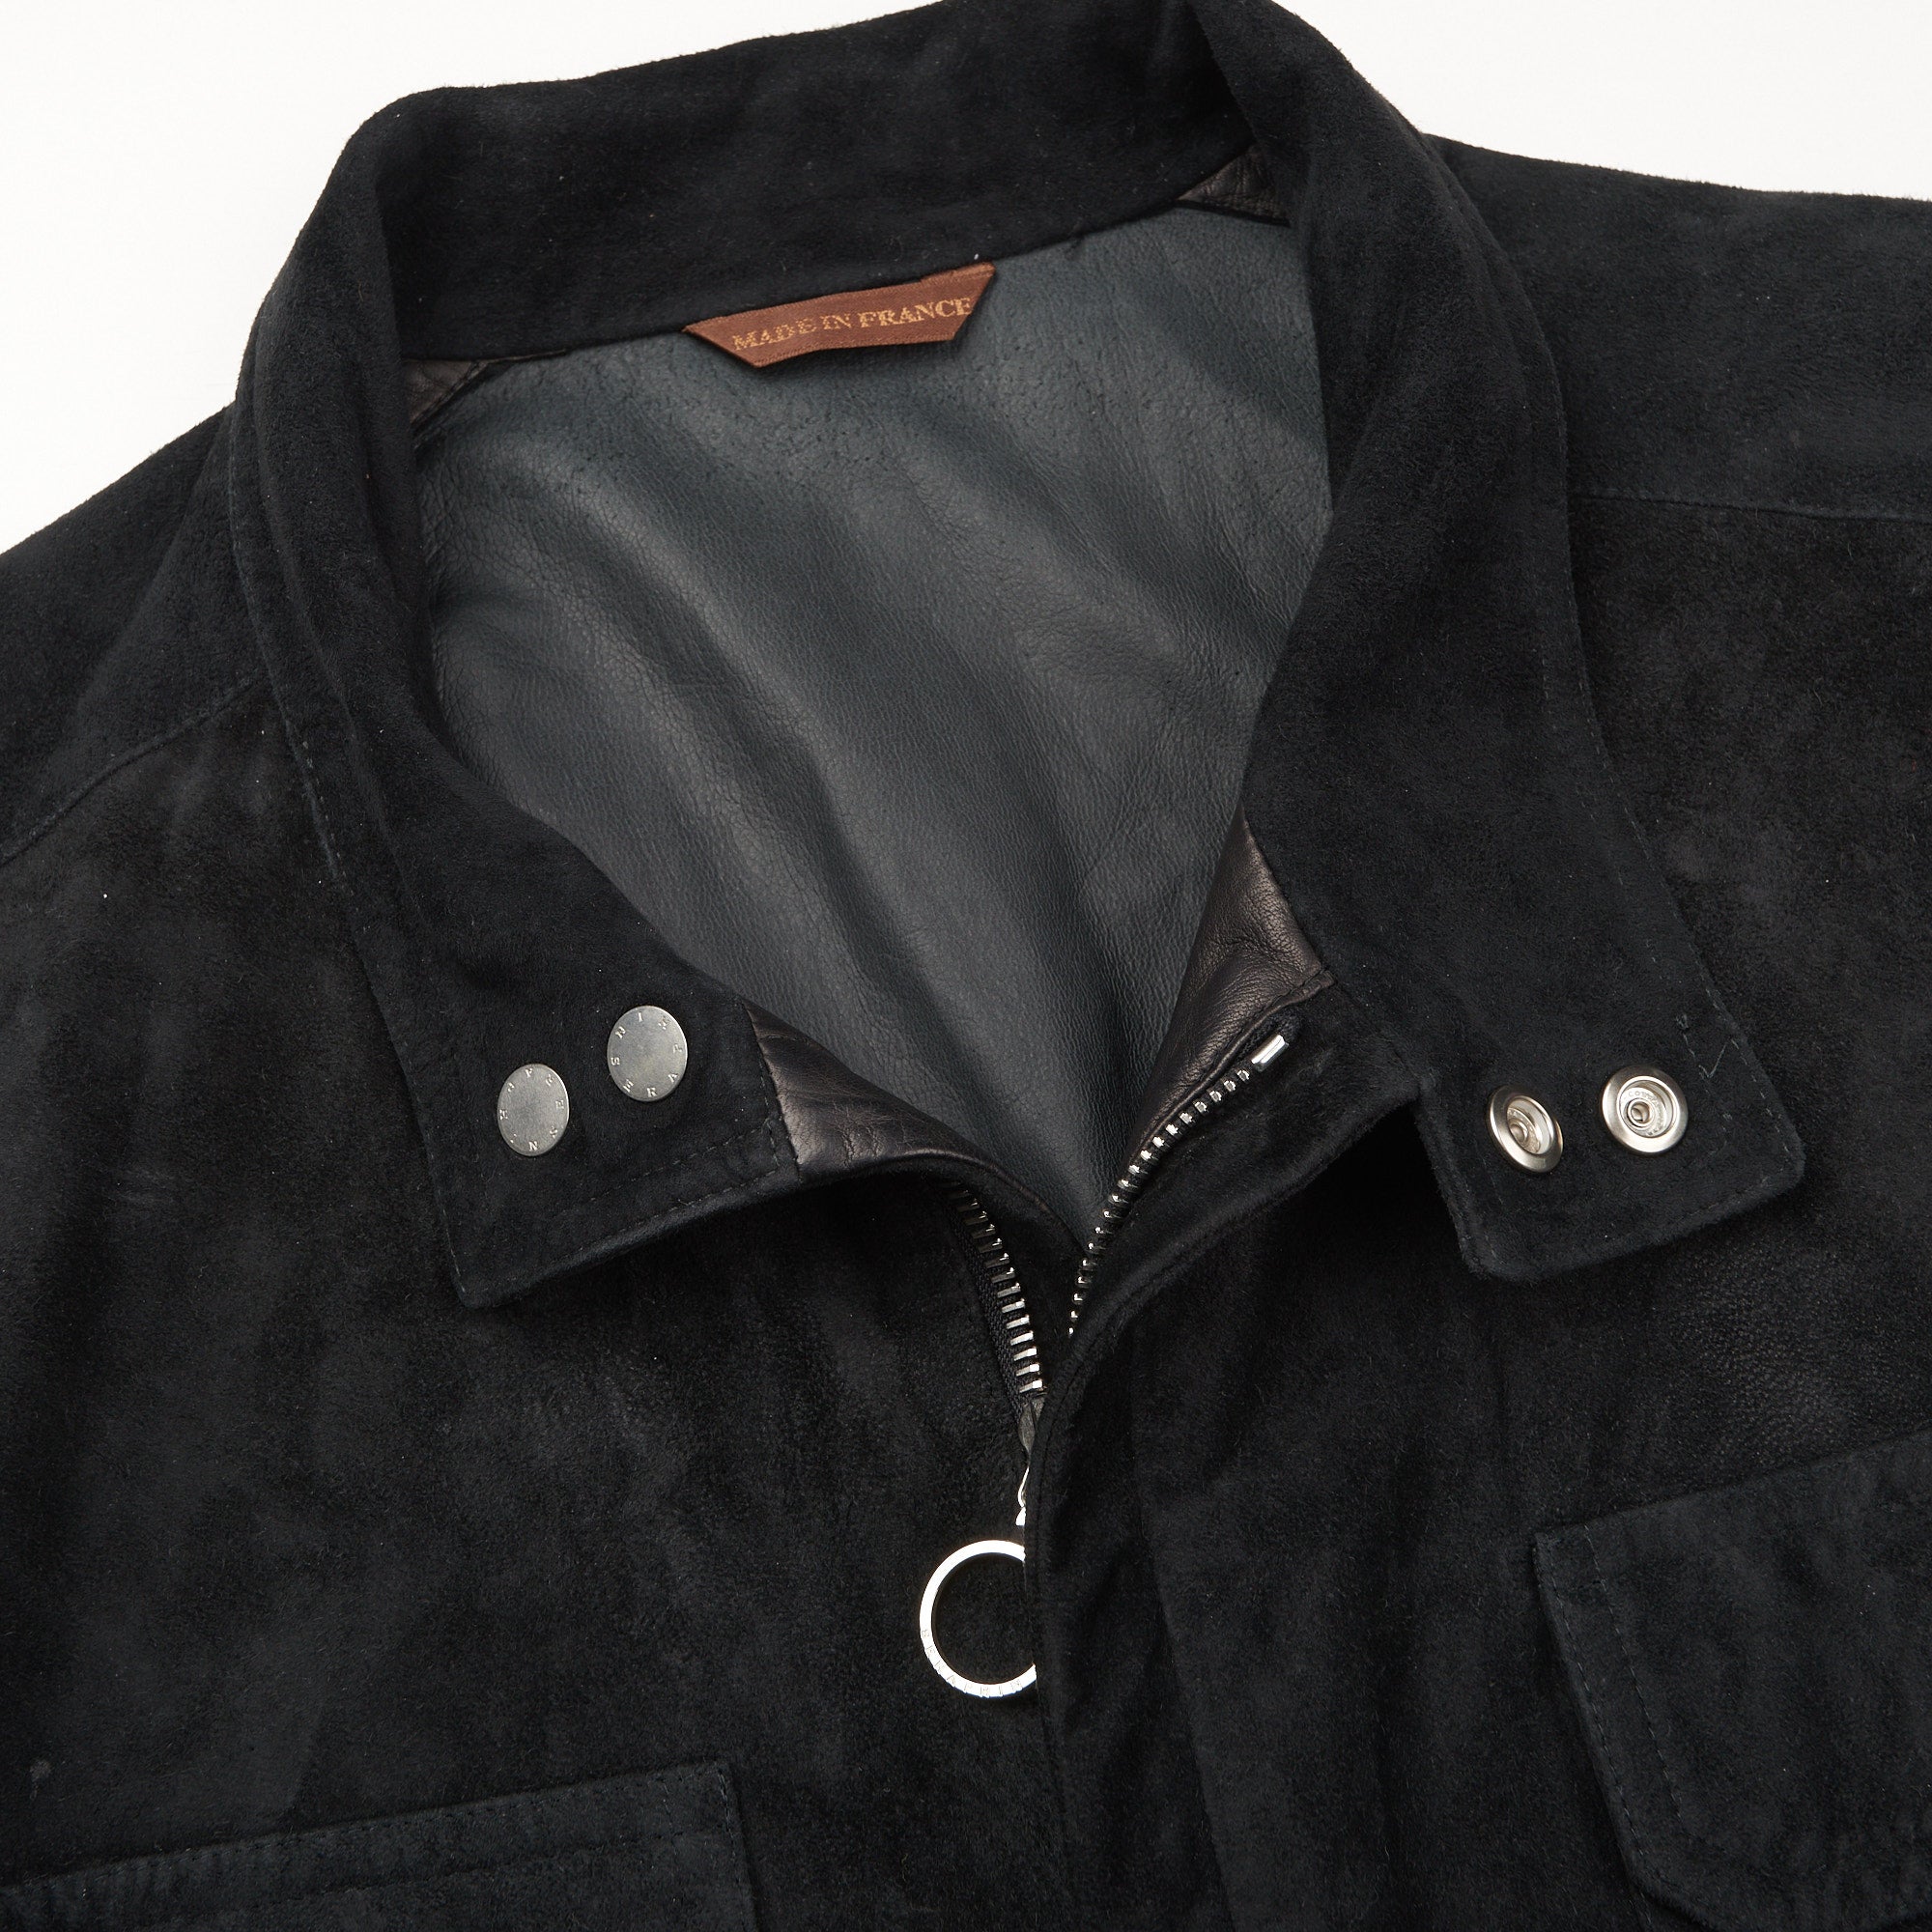 SERAPHIN Black Suede Goat Leather Unlined Field Jacket FR 50 US M SERAPHIN